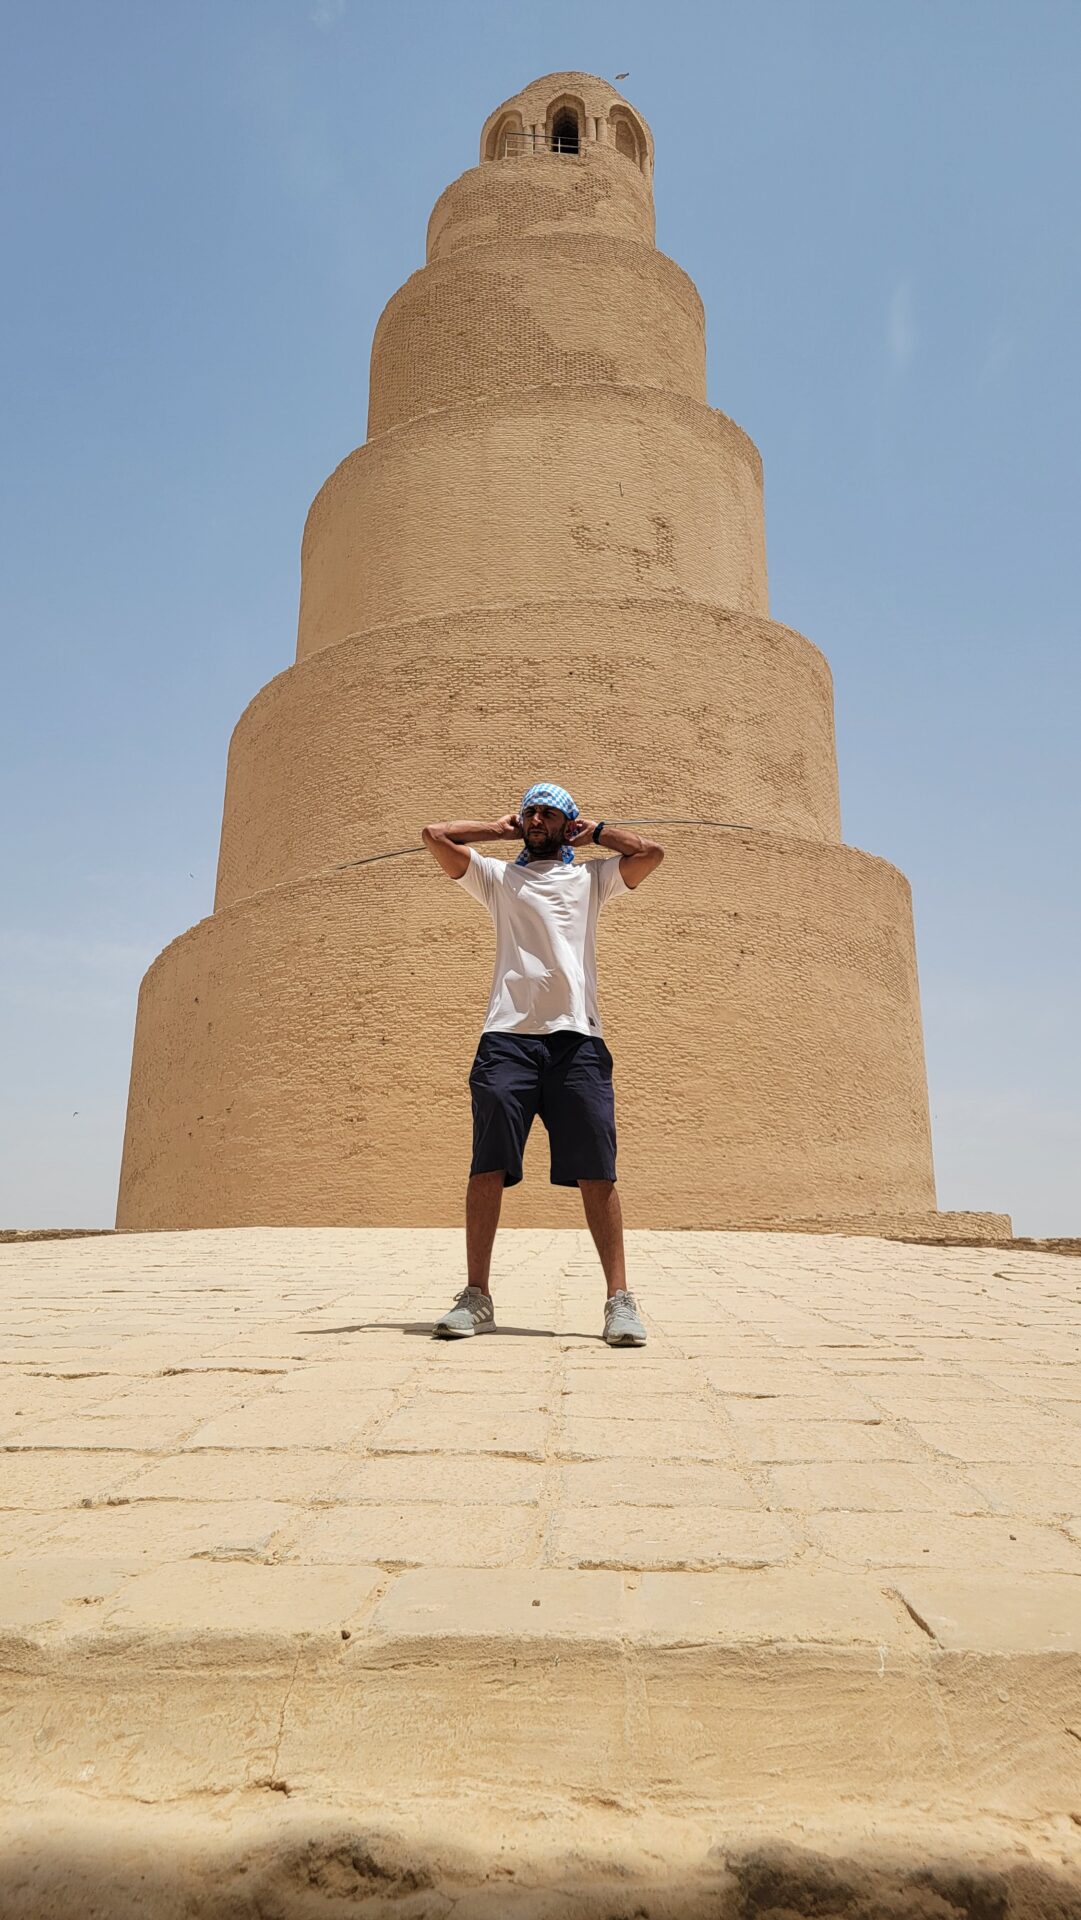 a man standing in front of a large tower with Great Mosque of Samarra in the background